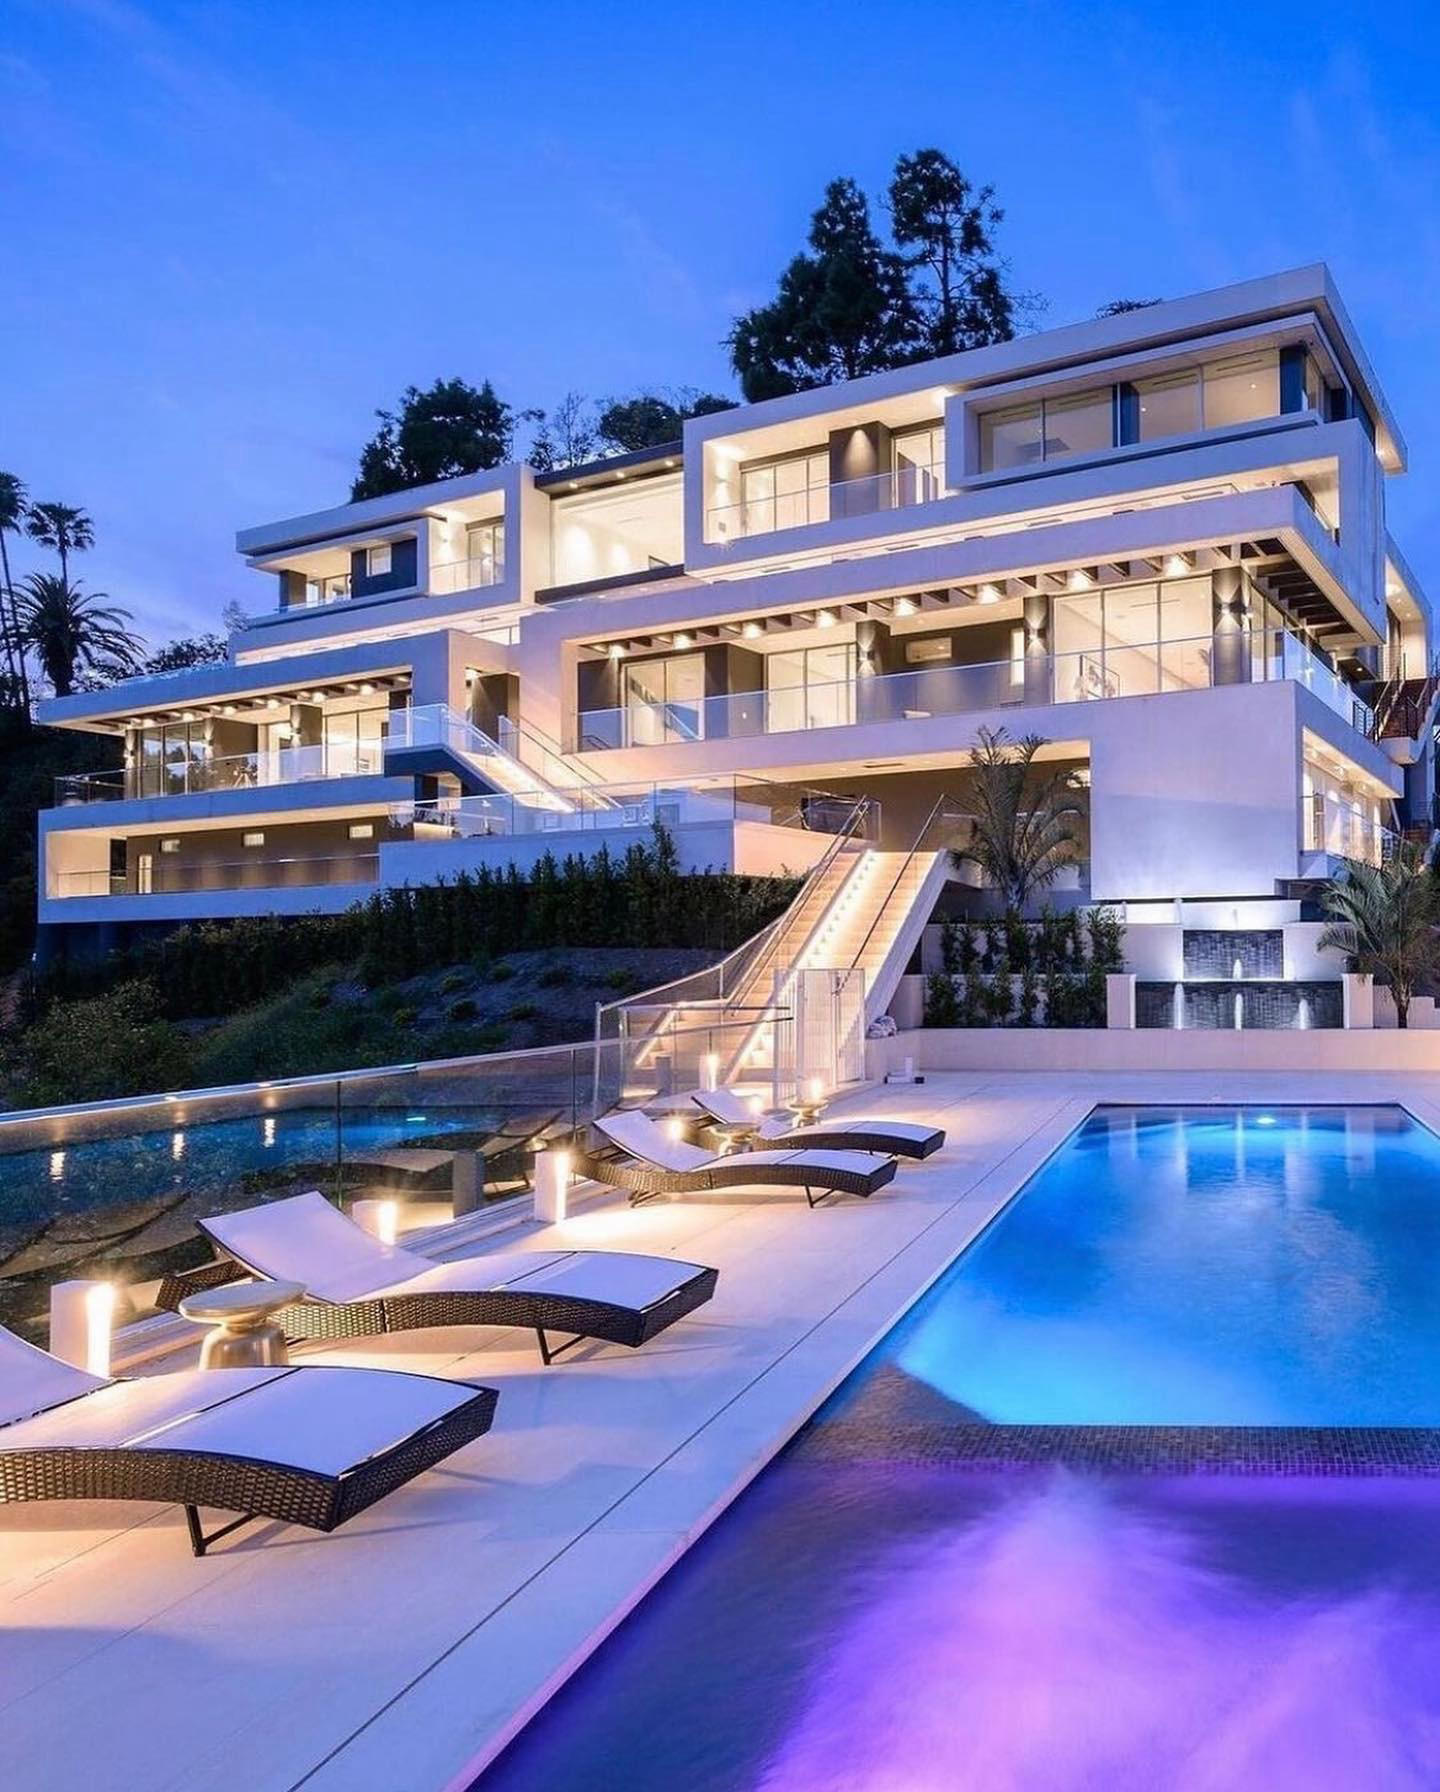 Los Angeles Mansions - “The Orchard Bel Air” sets the bar for luxury